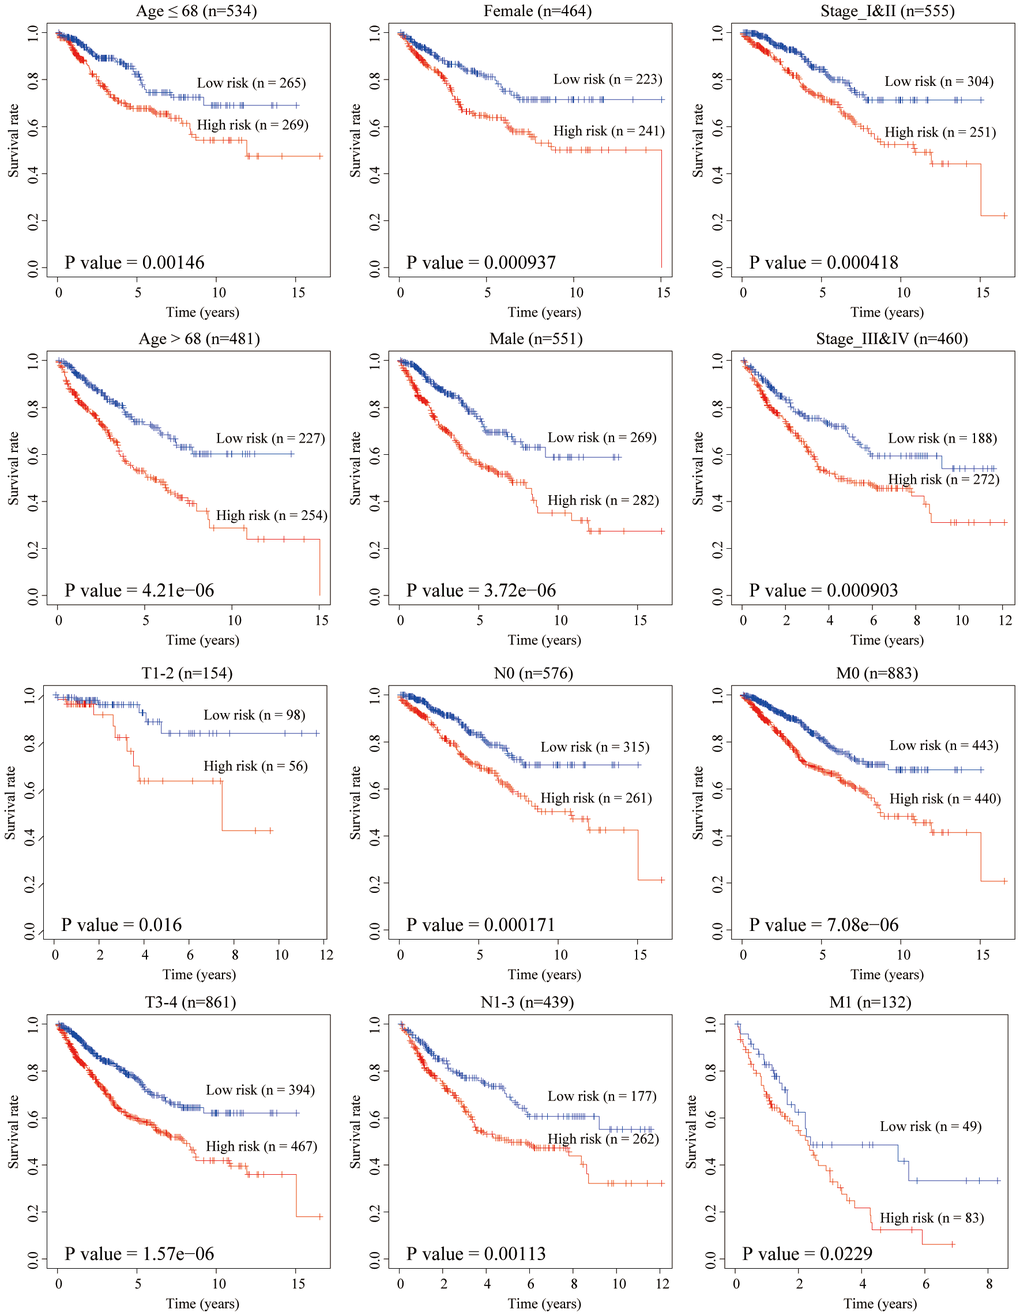 Stratified survival analysis adjusted to age, gender, stage, T, N and M. All CRC patients in the training and testing groups were summarized in the stratified survival analysis. 68 years old was the median age of 1,015 CRC patients.